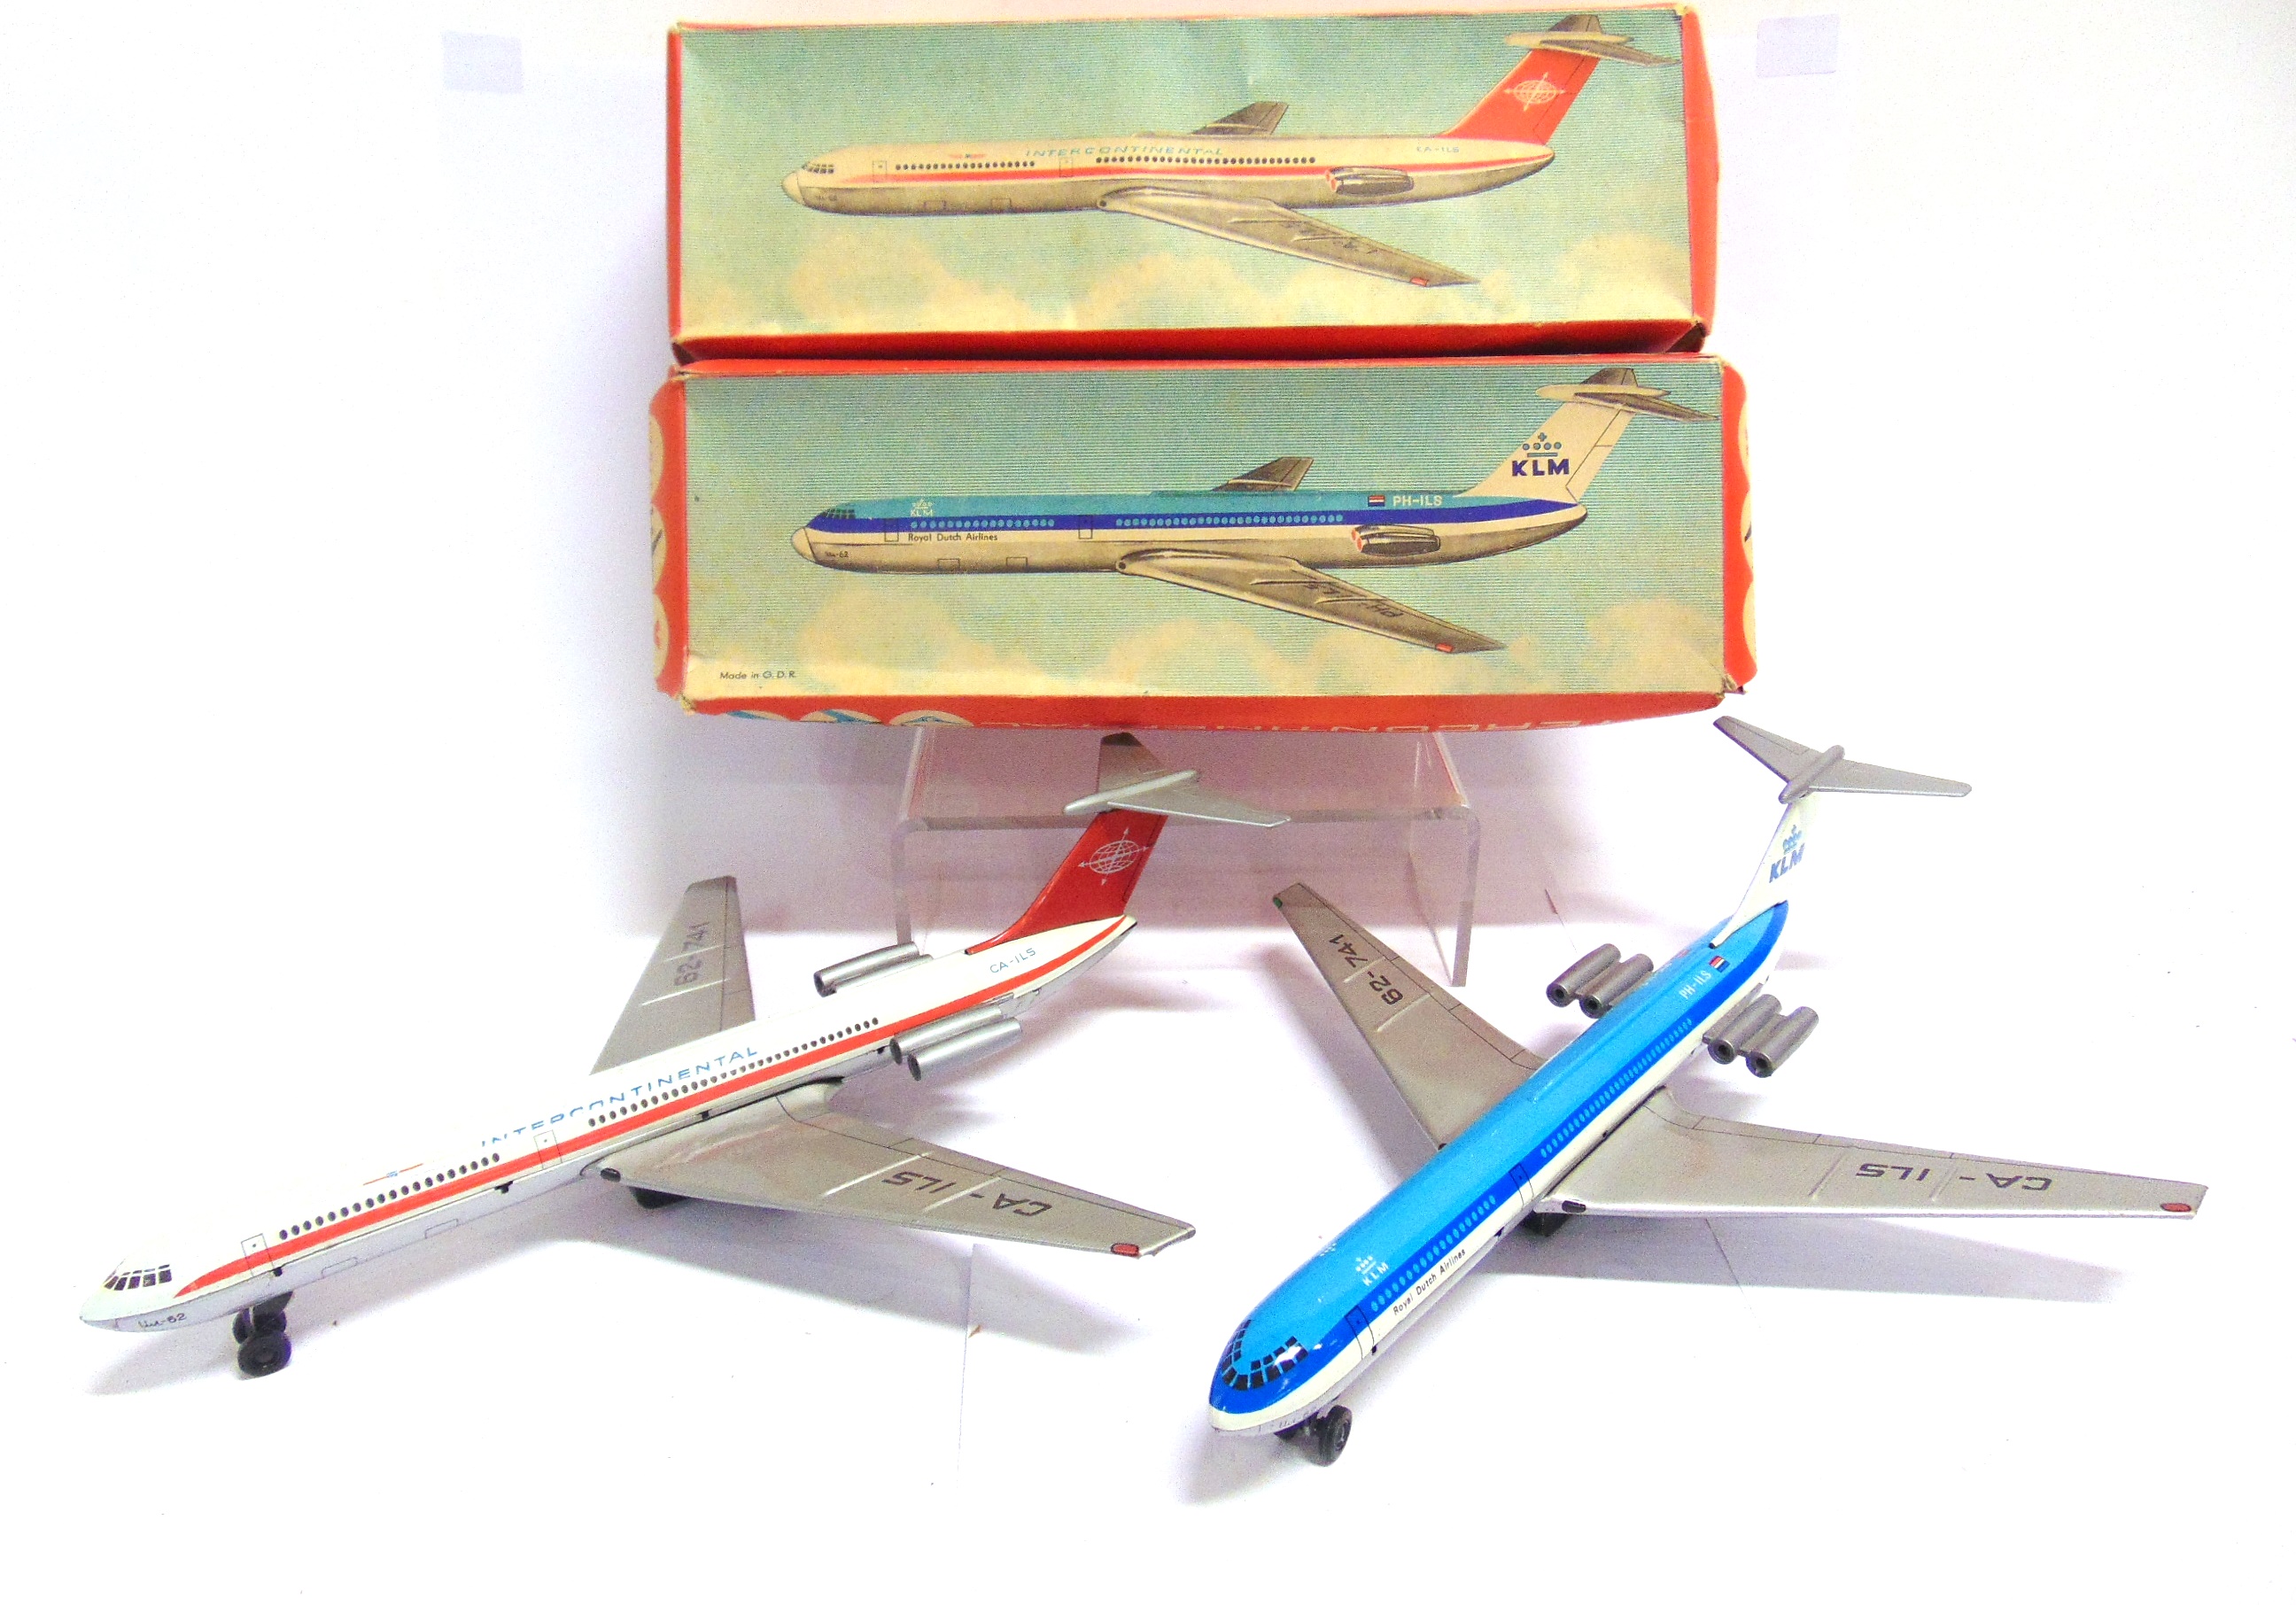 TWO EAST GERMAN TINPLATE MODEL AIR LINERS one 'KLM' and one 'Intercontinental', each with a